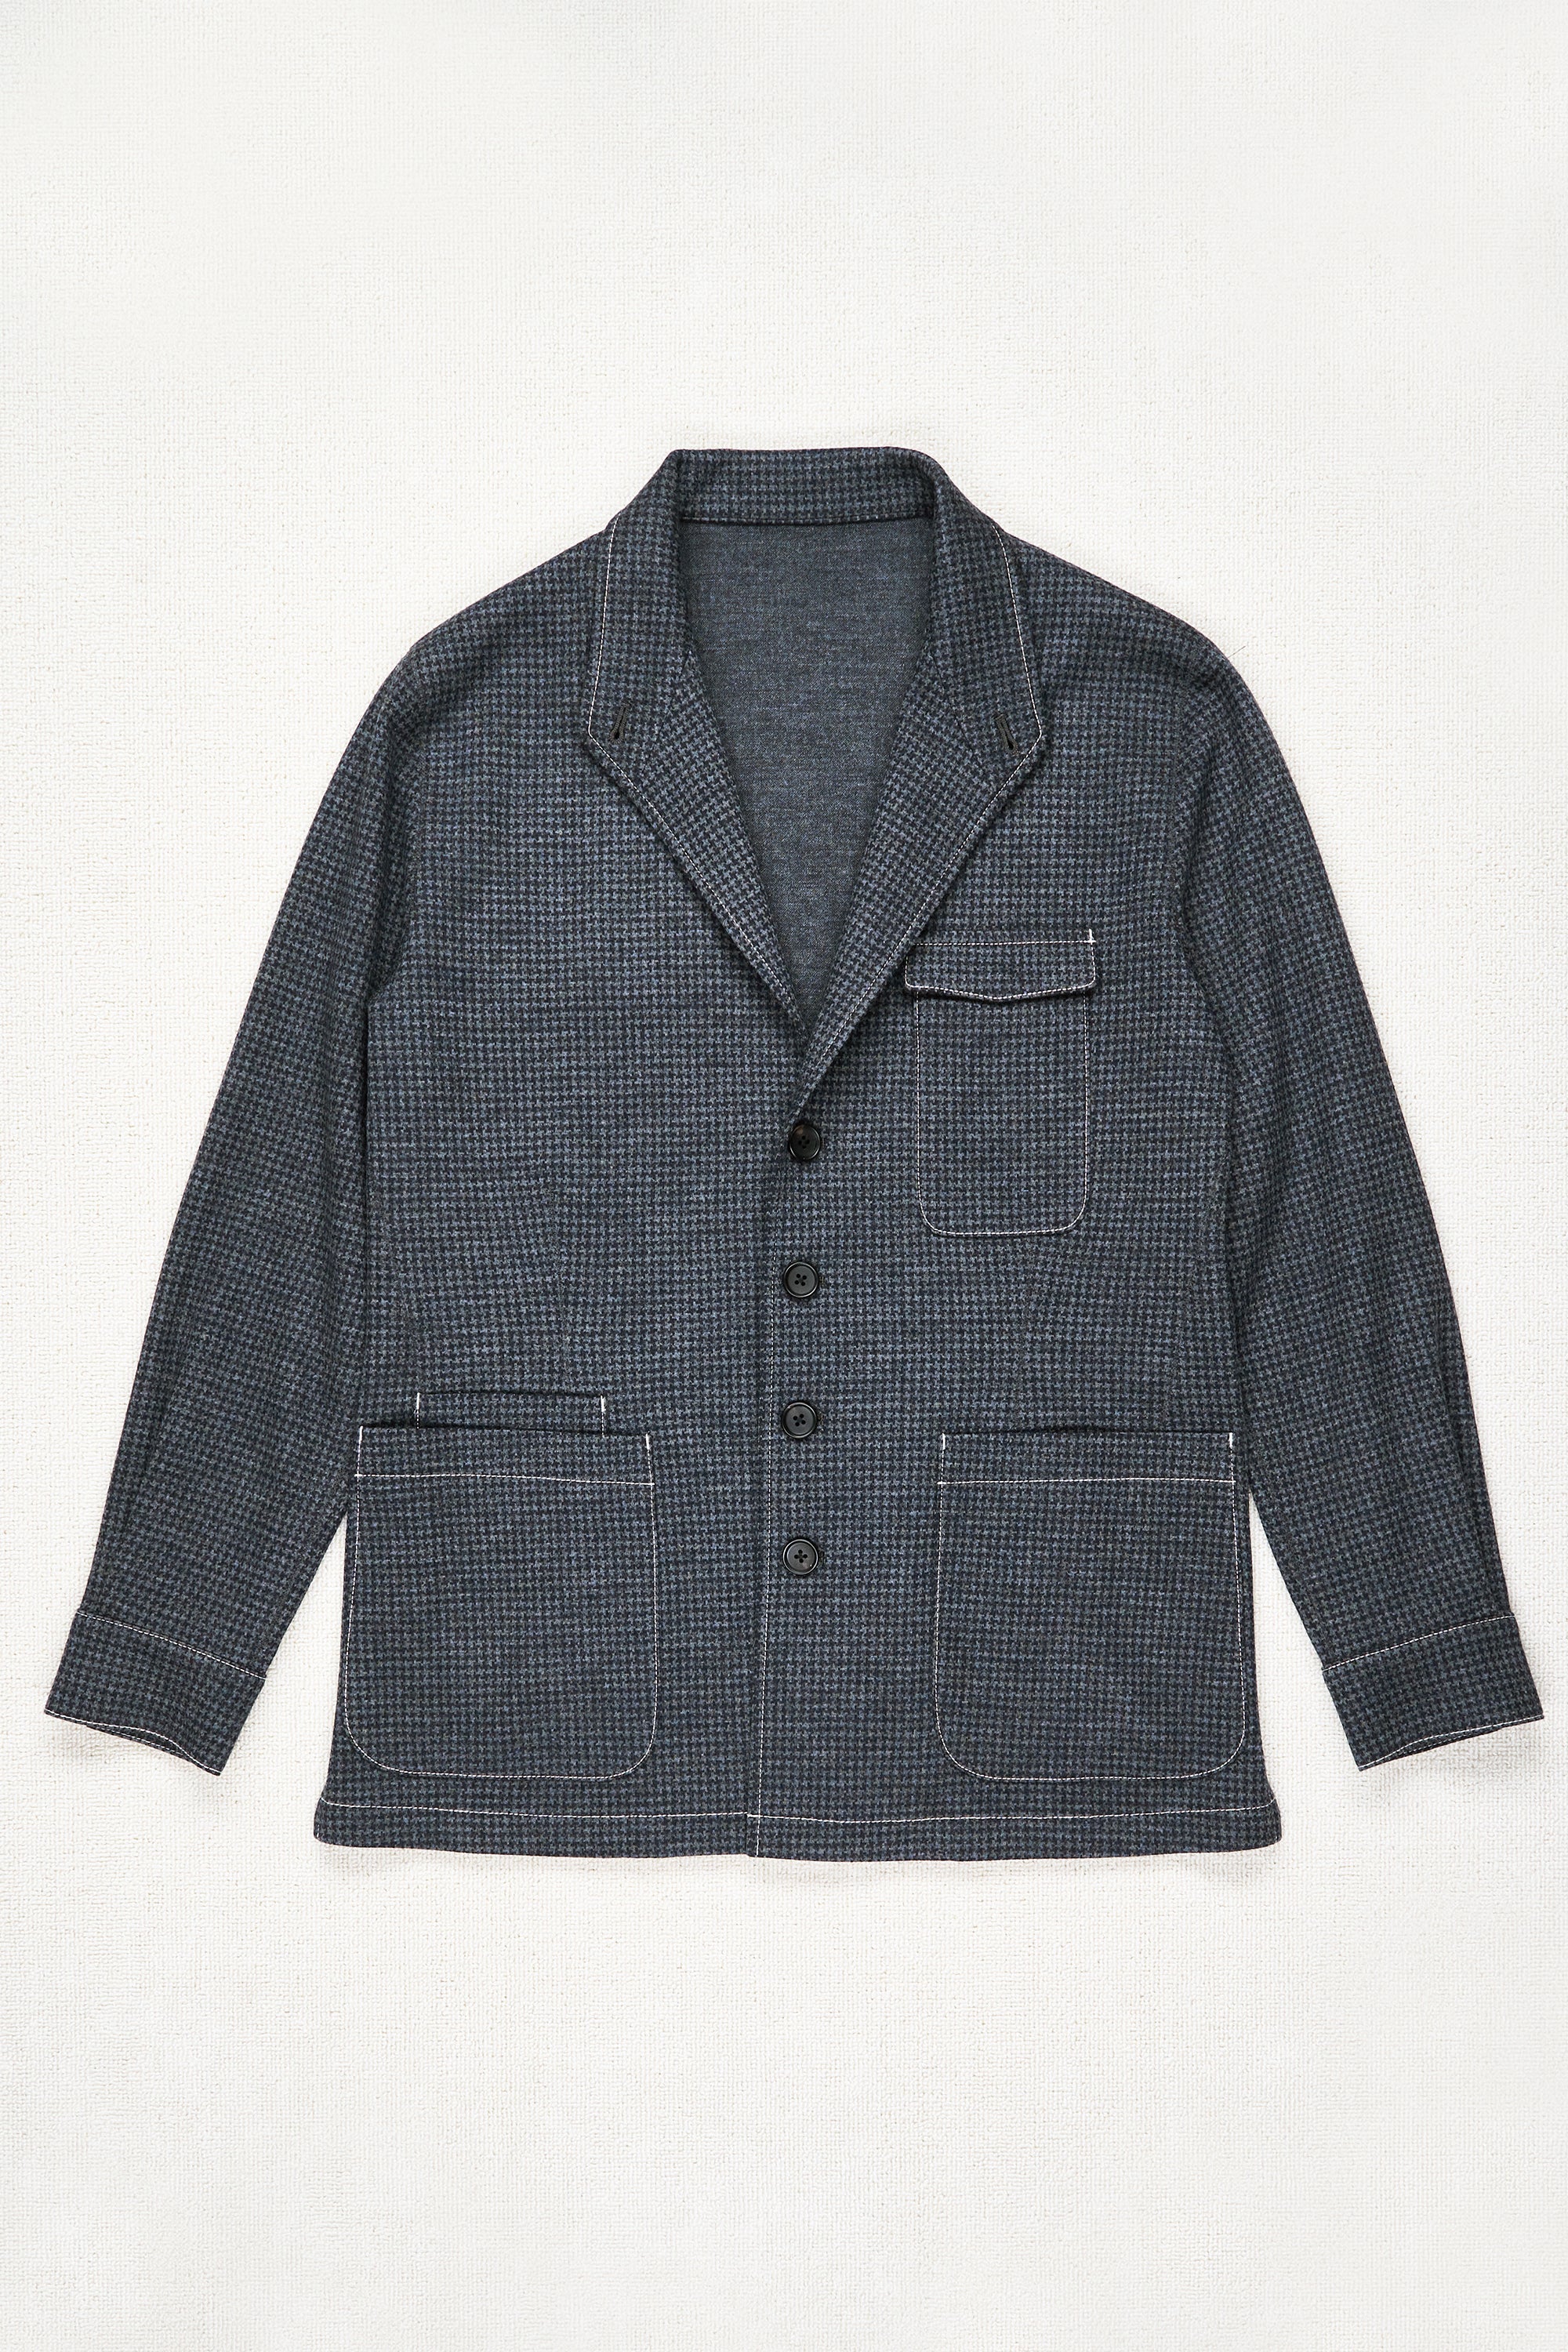 The Armoury Grey Houndstooth Wool City Hunter Jacket